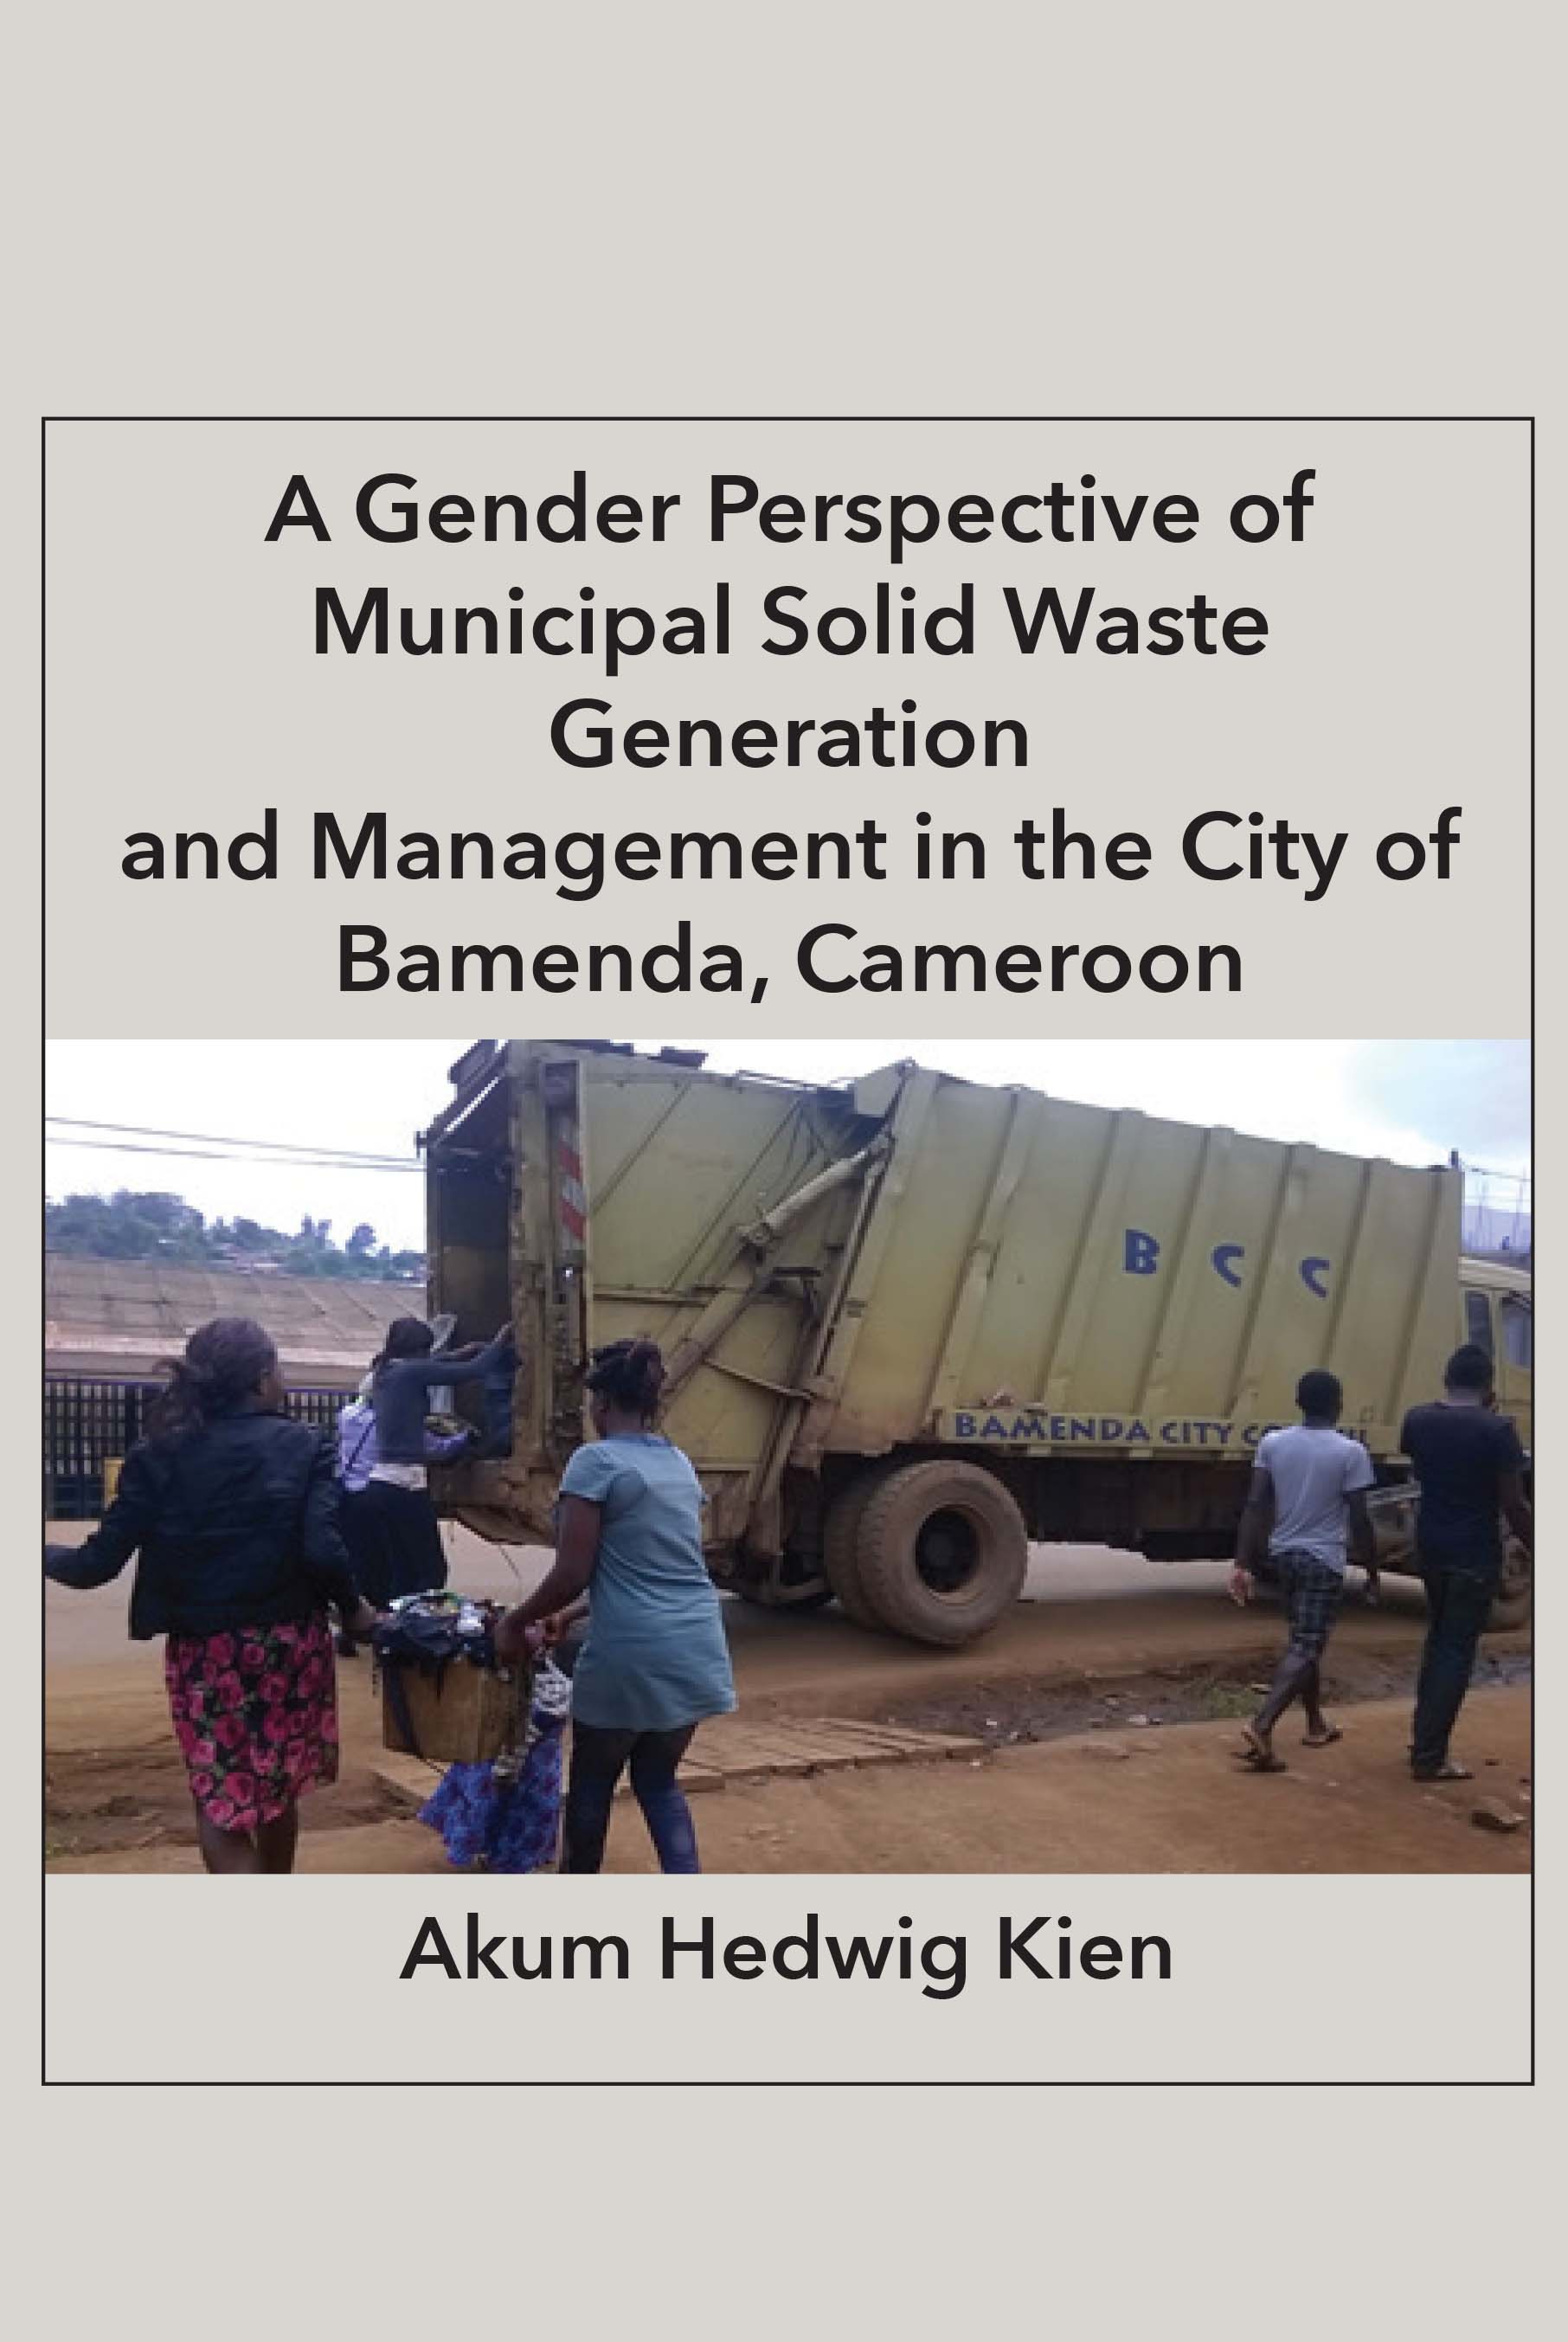 A Gender Perspective of Municipal Solid Waste Generation and Management in the City of Bamenda, Cameroon